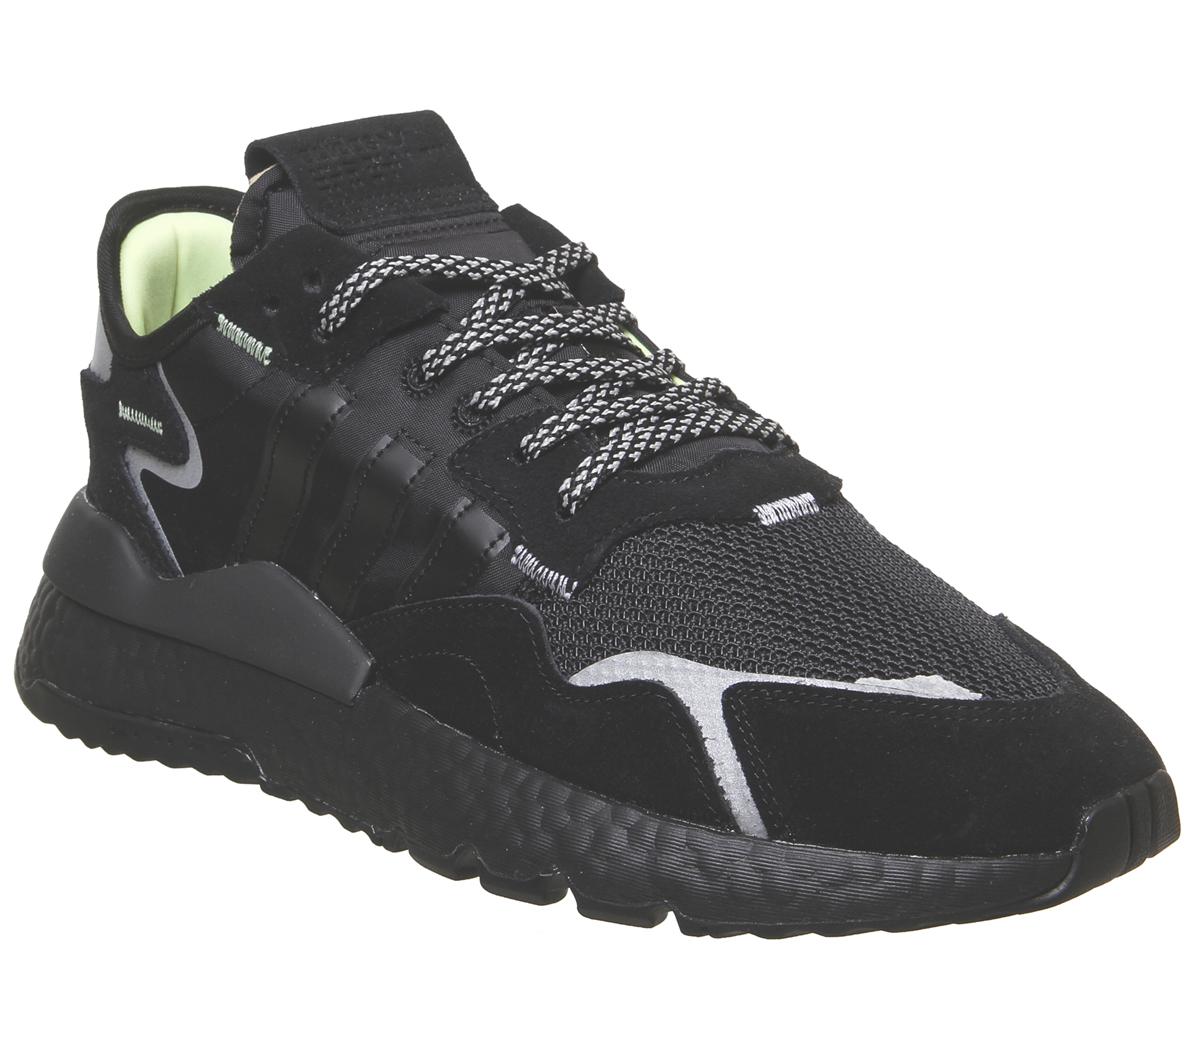 adidas nite jogger boost trainers